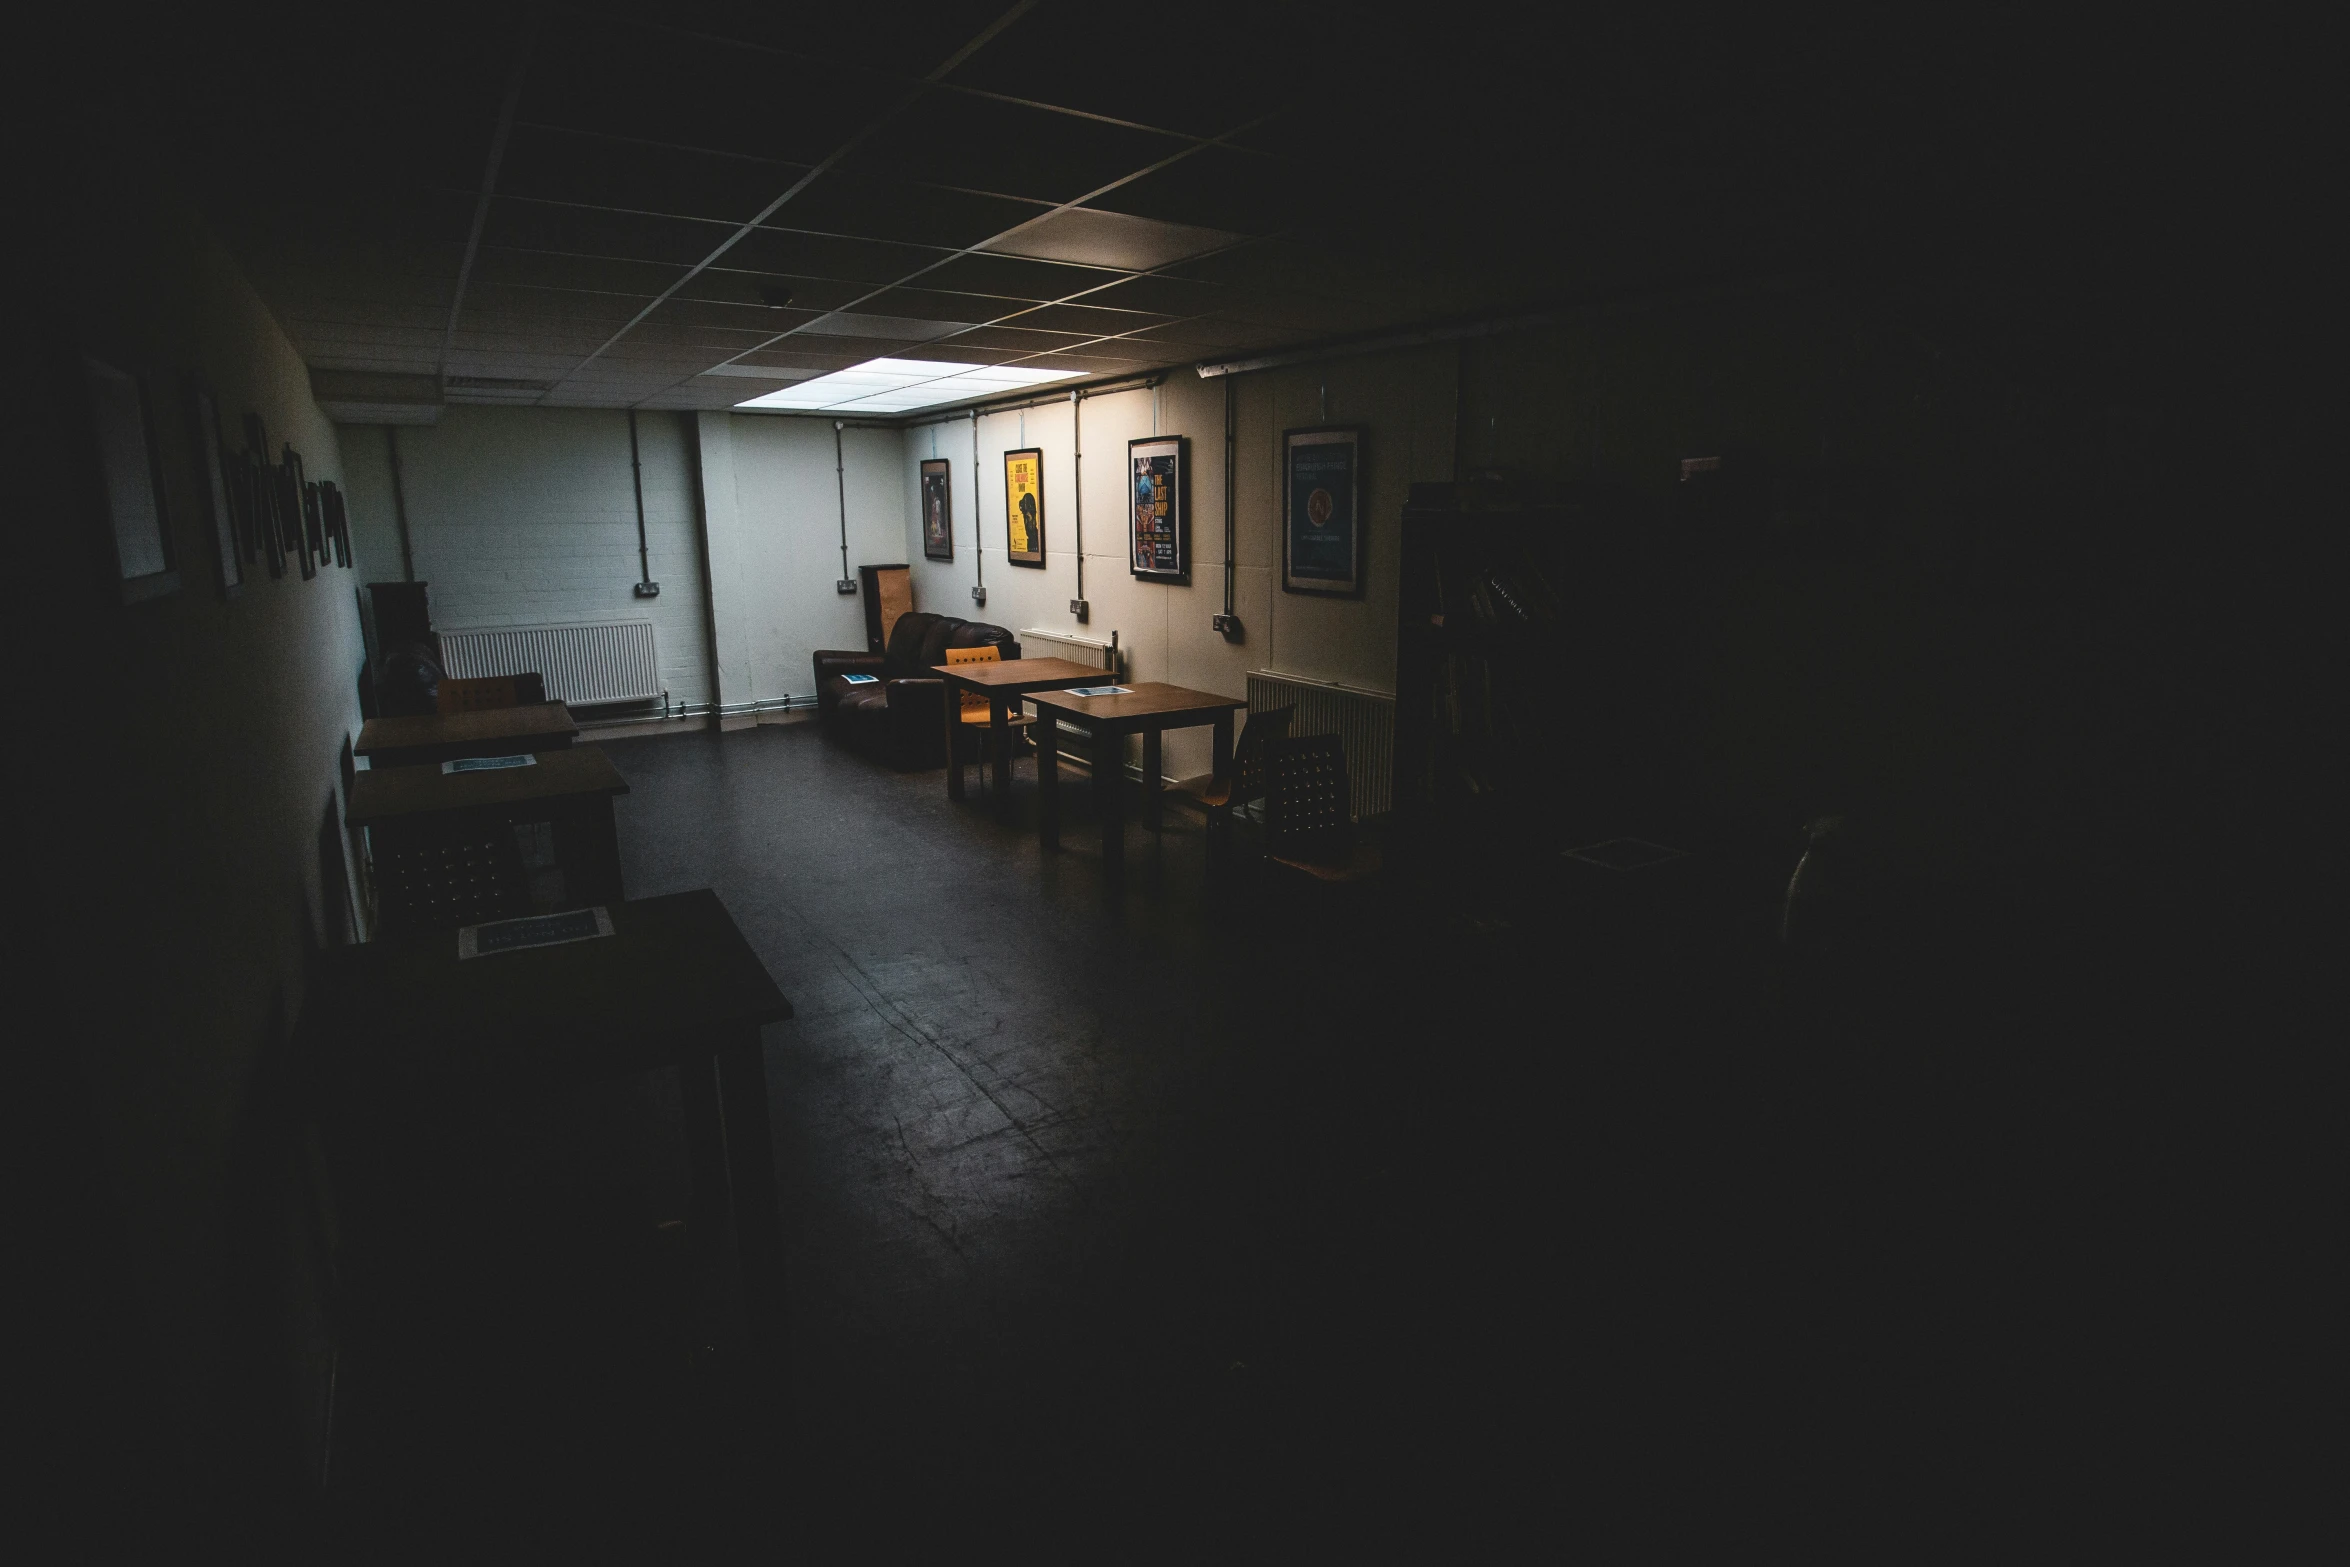 a dimly lit room with furniture and decorations